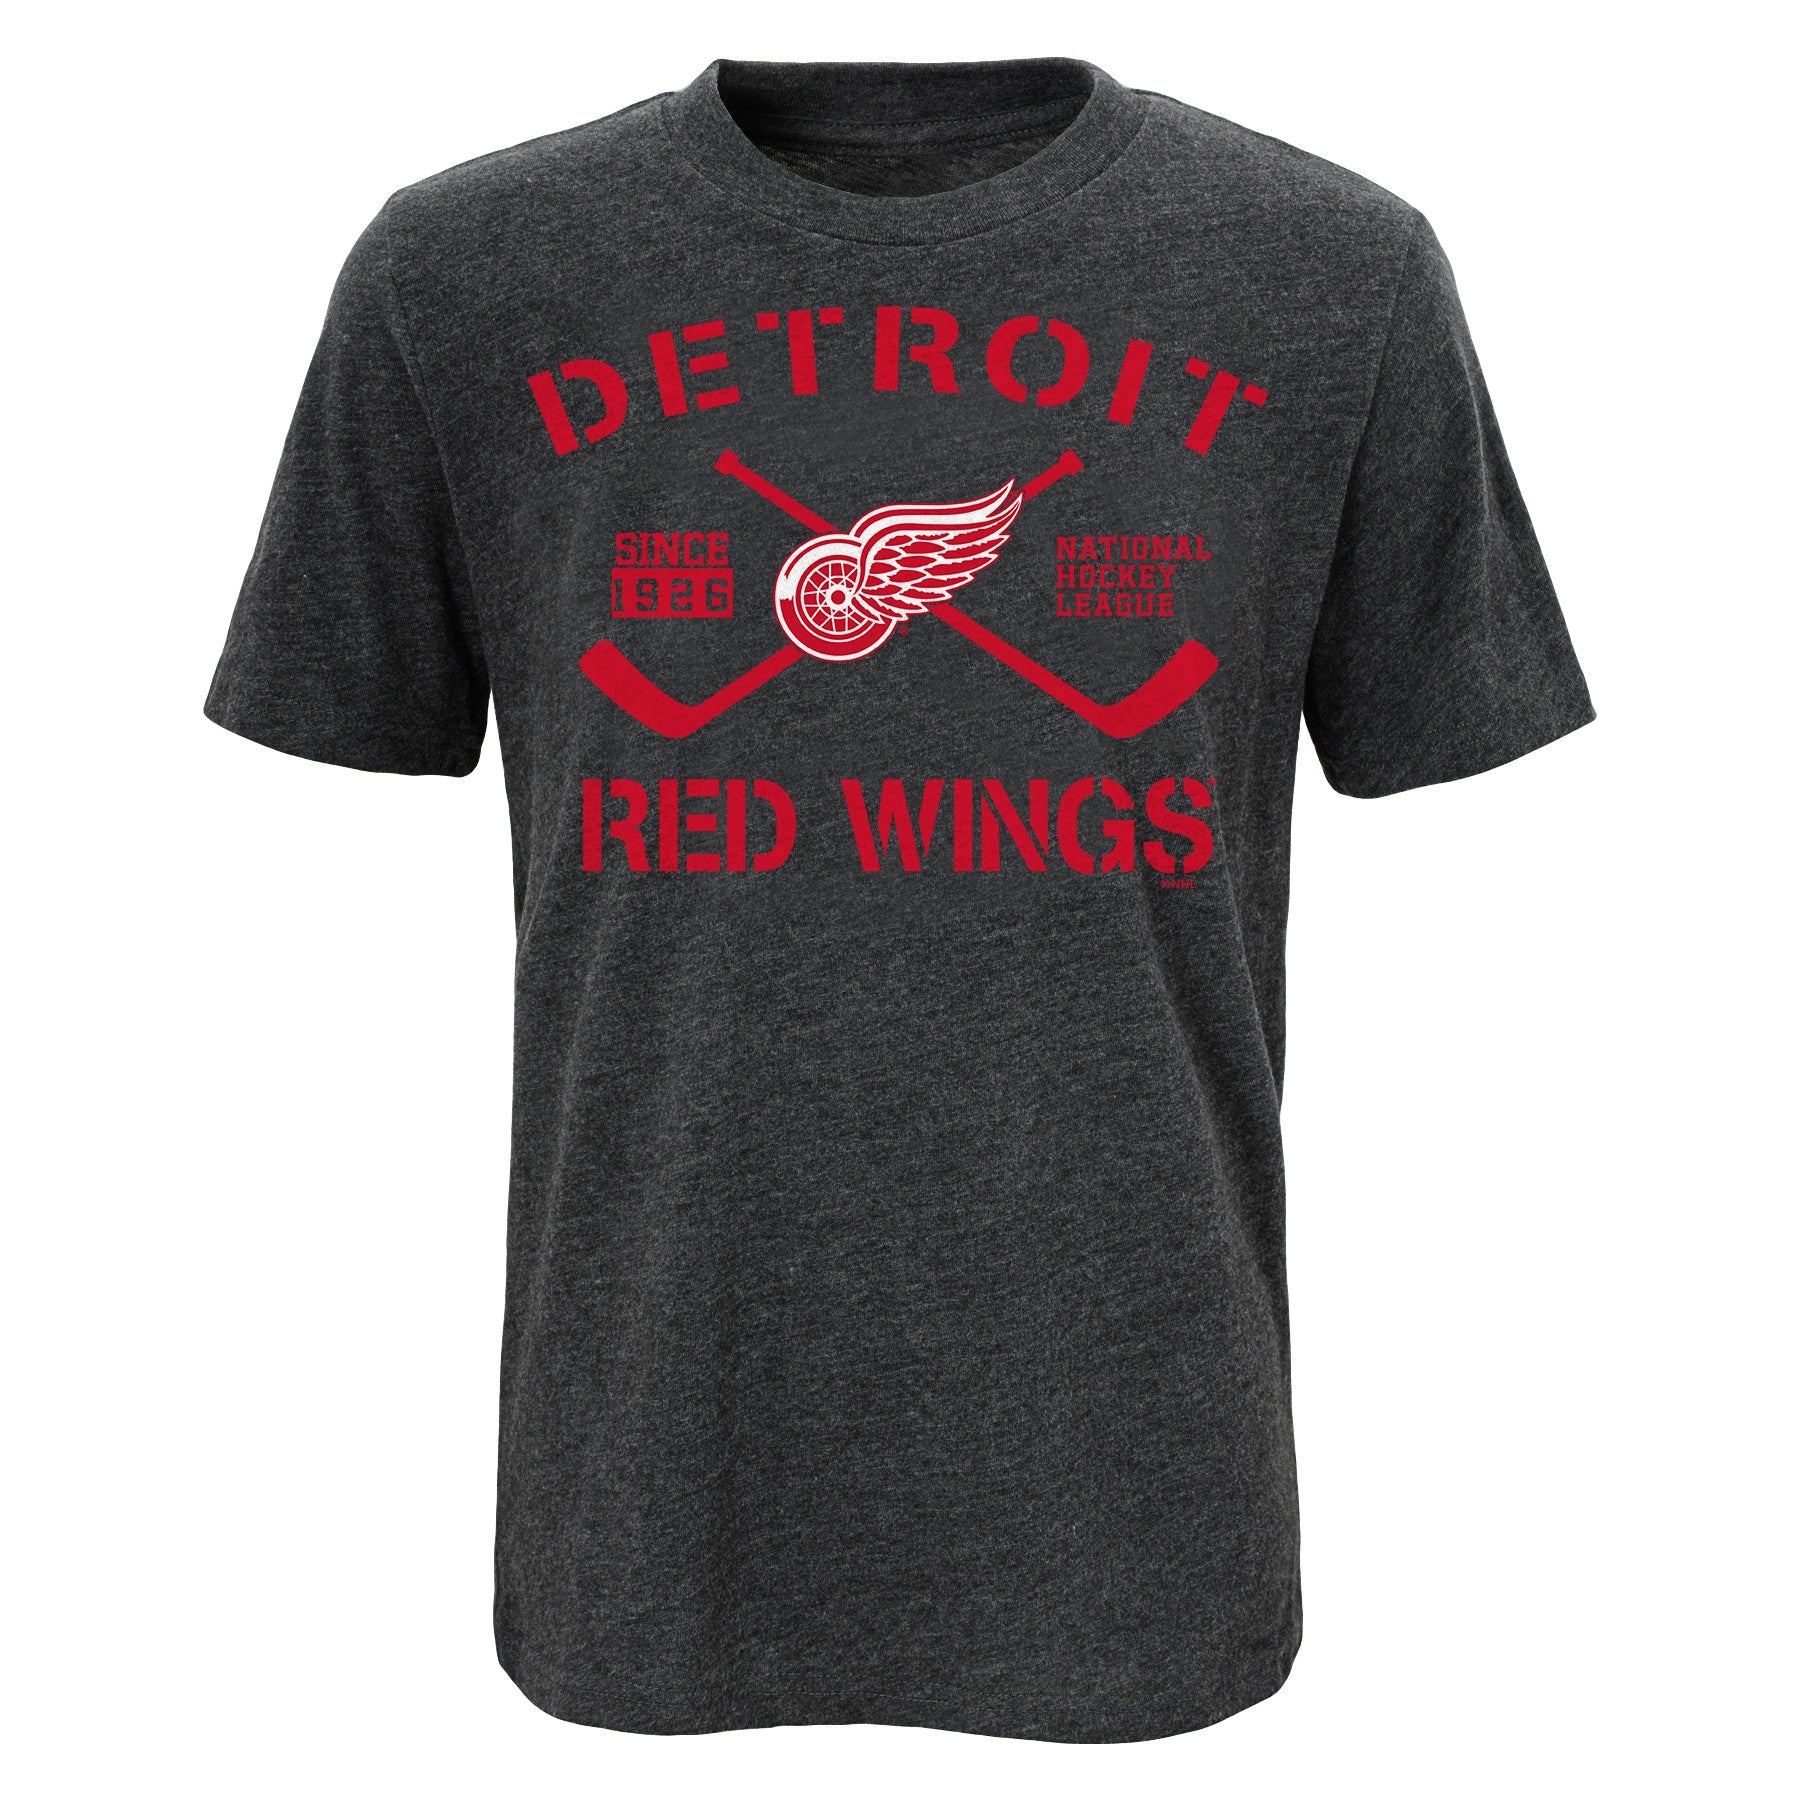 Detroit Red Wings Infant Outerstuff Red Replica Jersey - Detroit